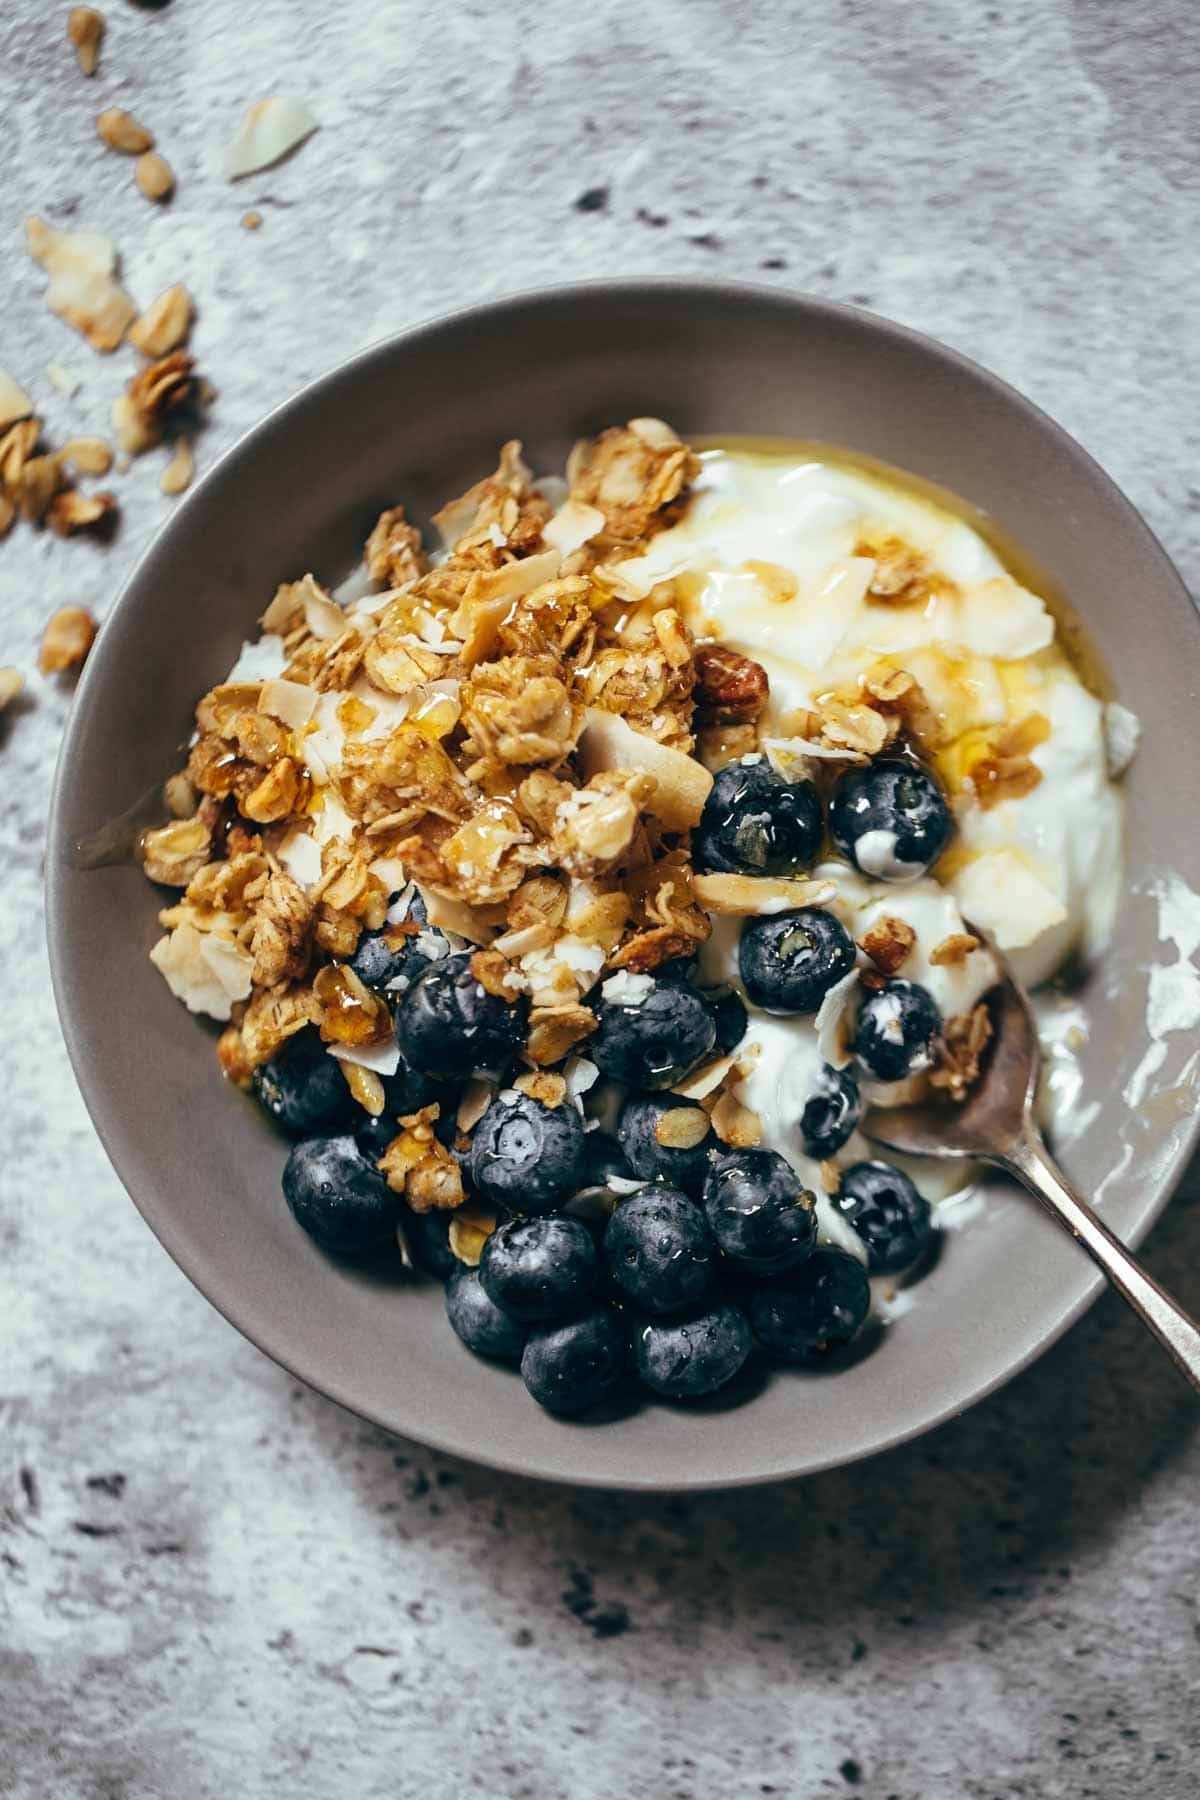 Perfect granola for taking along on summer vacation for easy, real food breakfasts! Made in 30 minutes. Simple and SO good! | pinchofyum.com